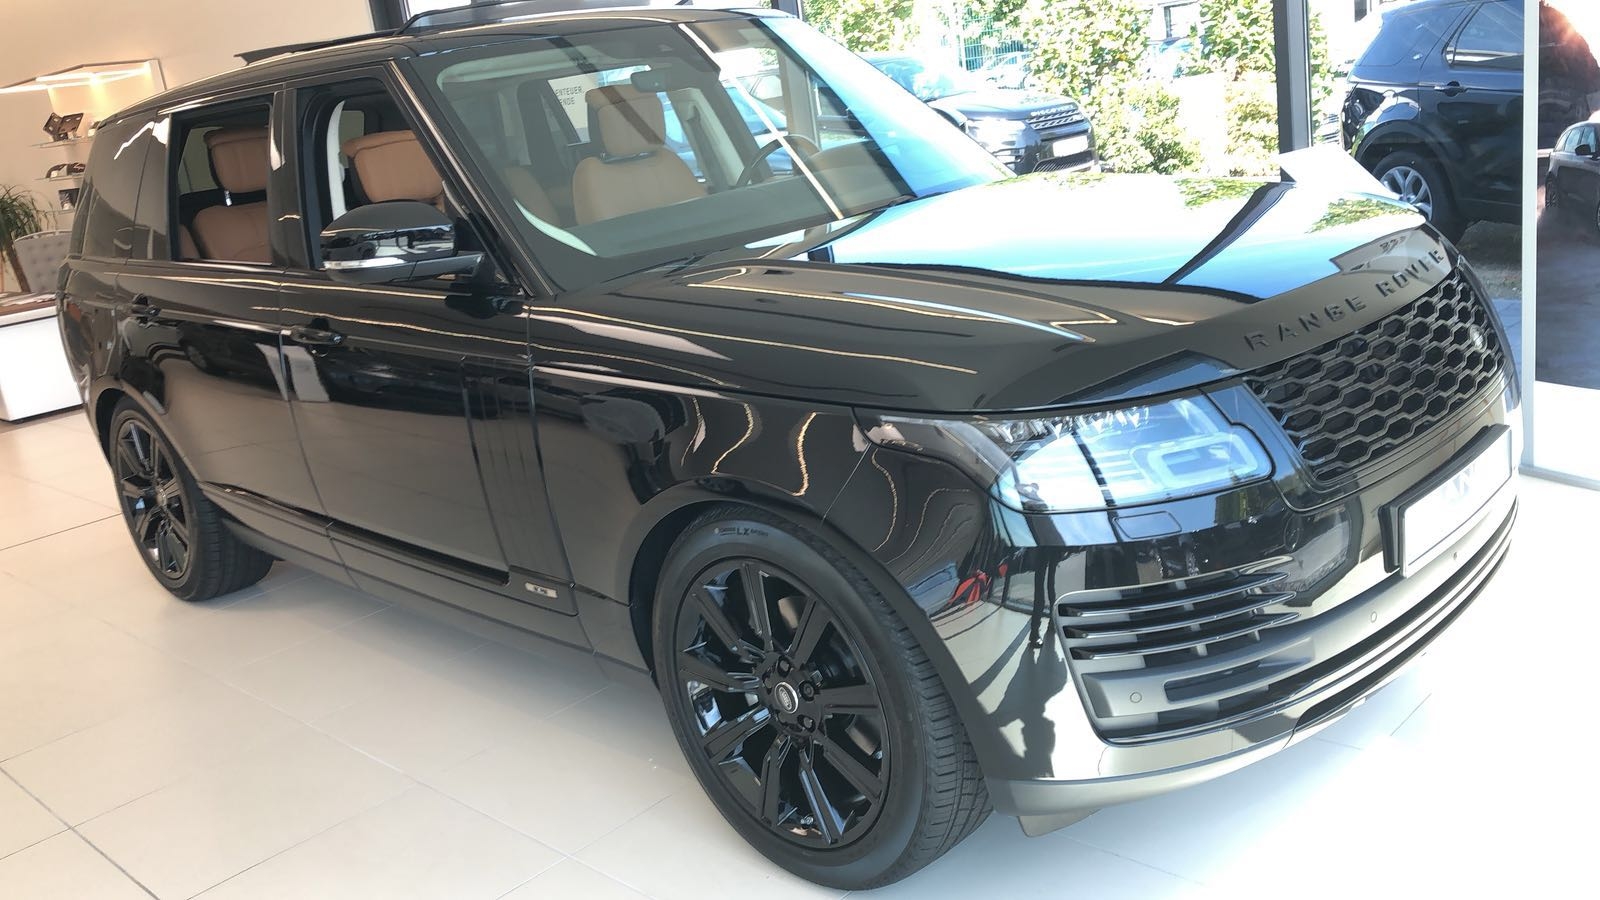 Range Rover Autobiography LWB 3,0l TD, with black package